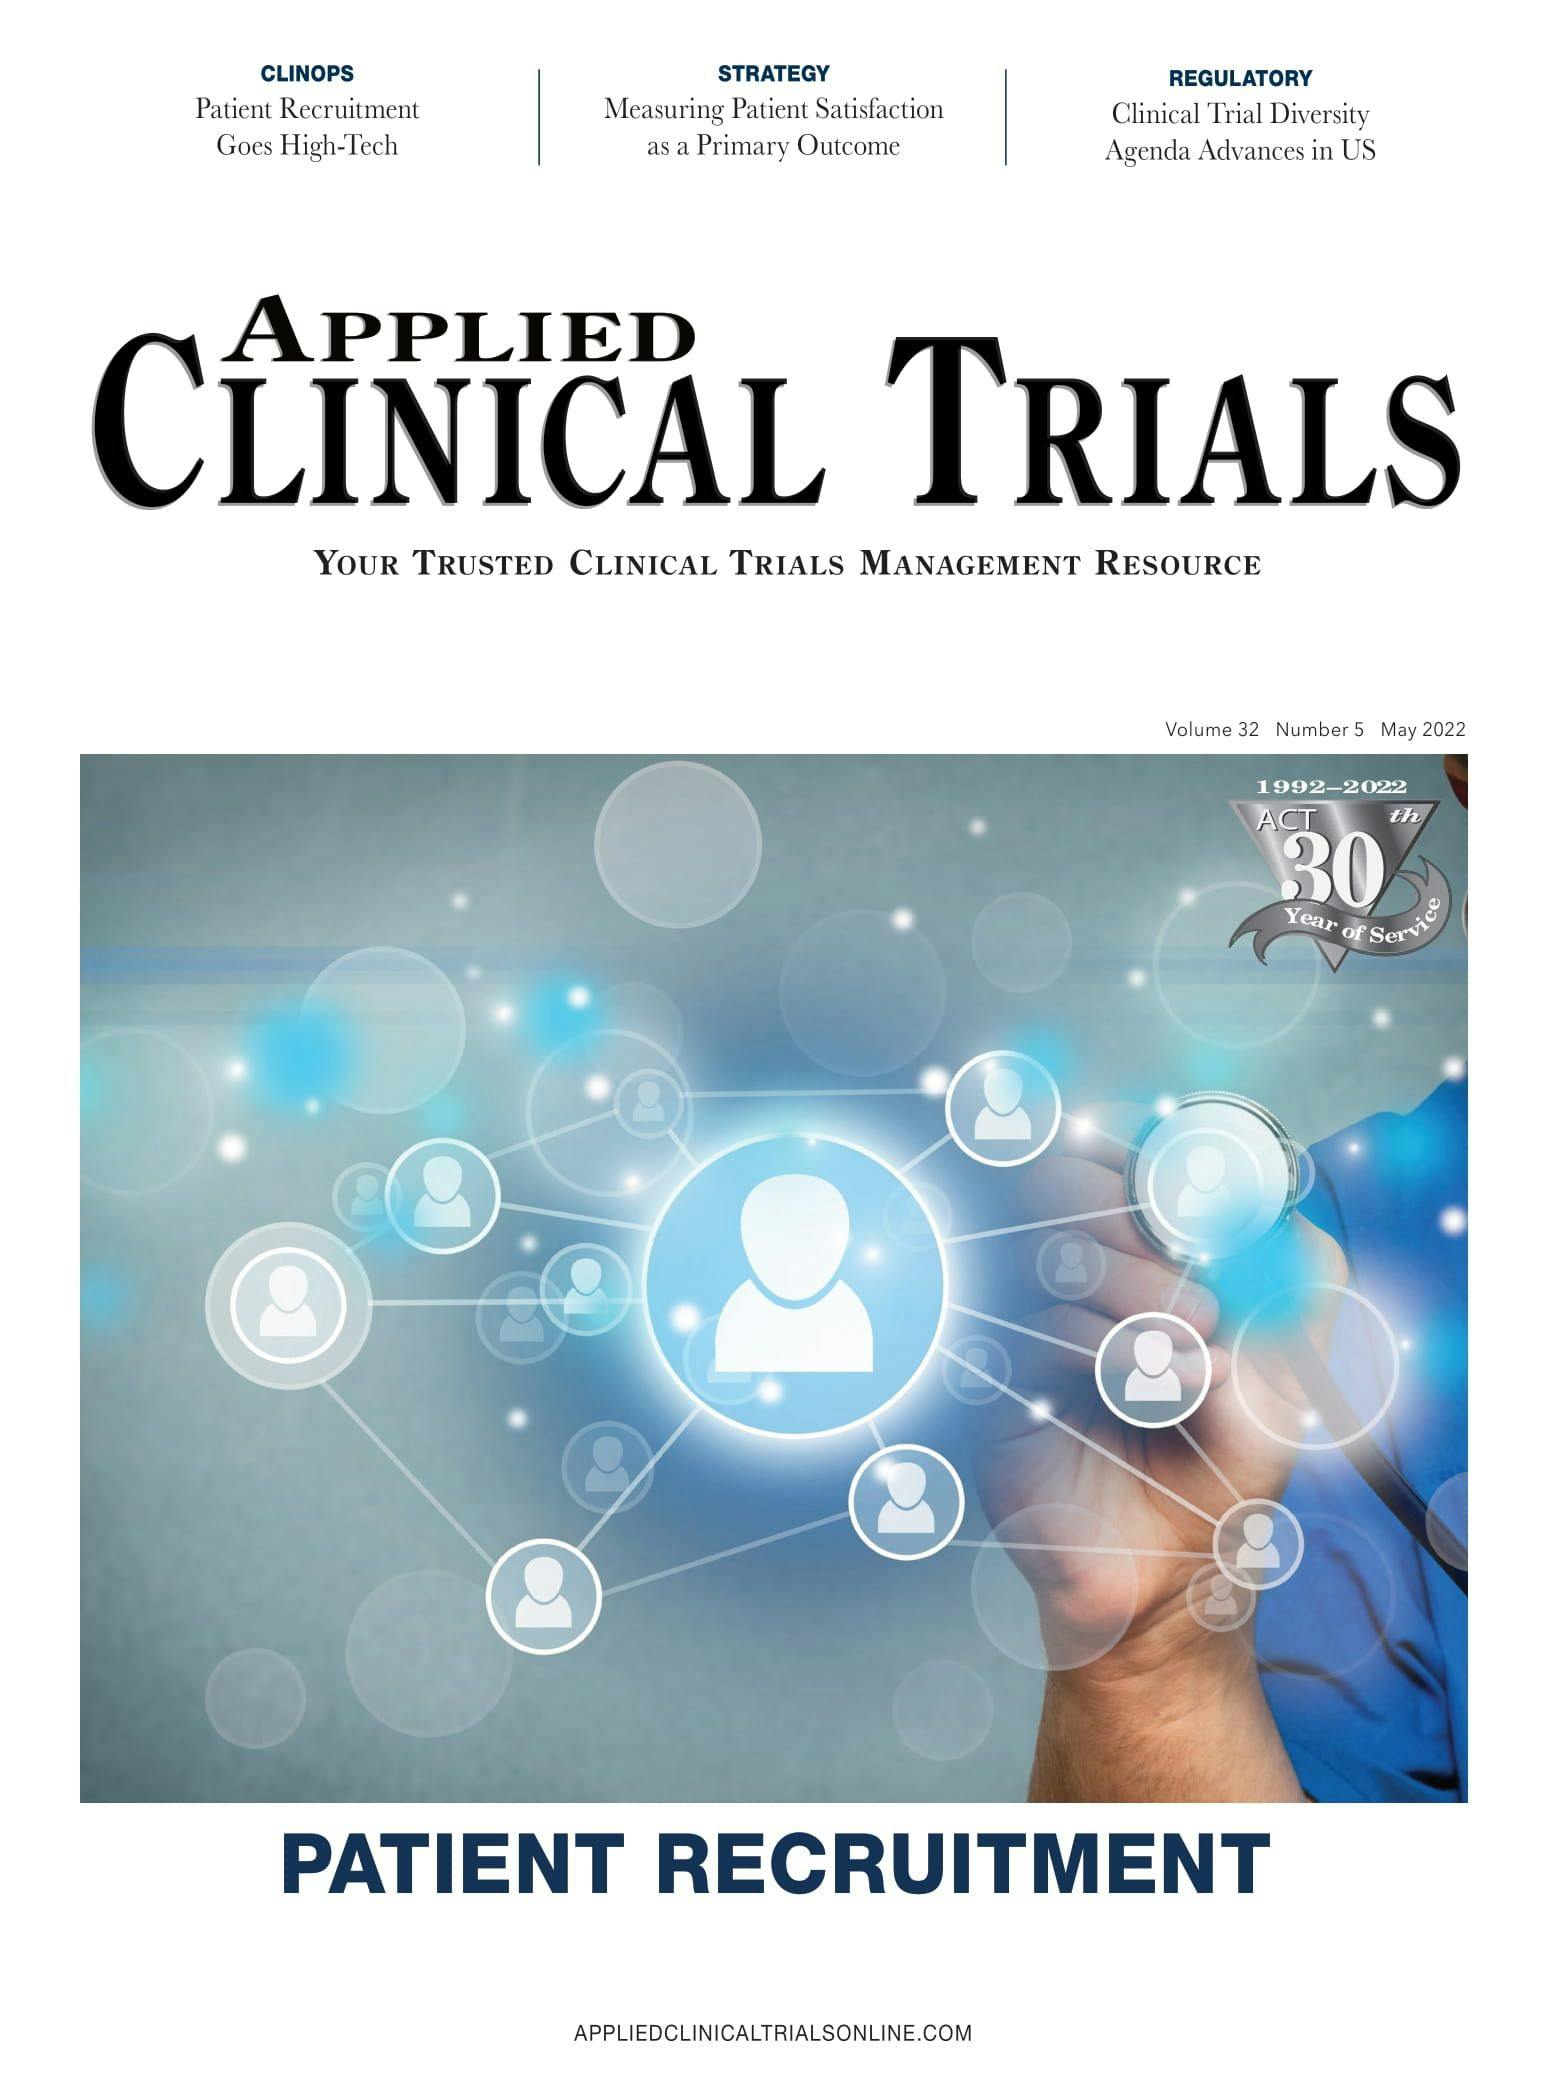 Applied Clinical Trials-05-01-2022